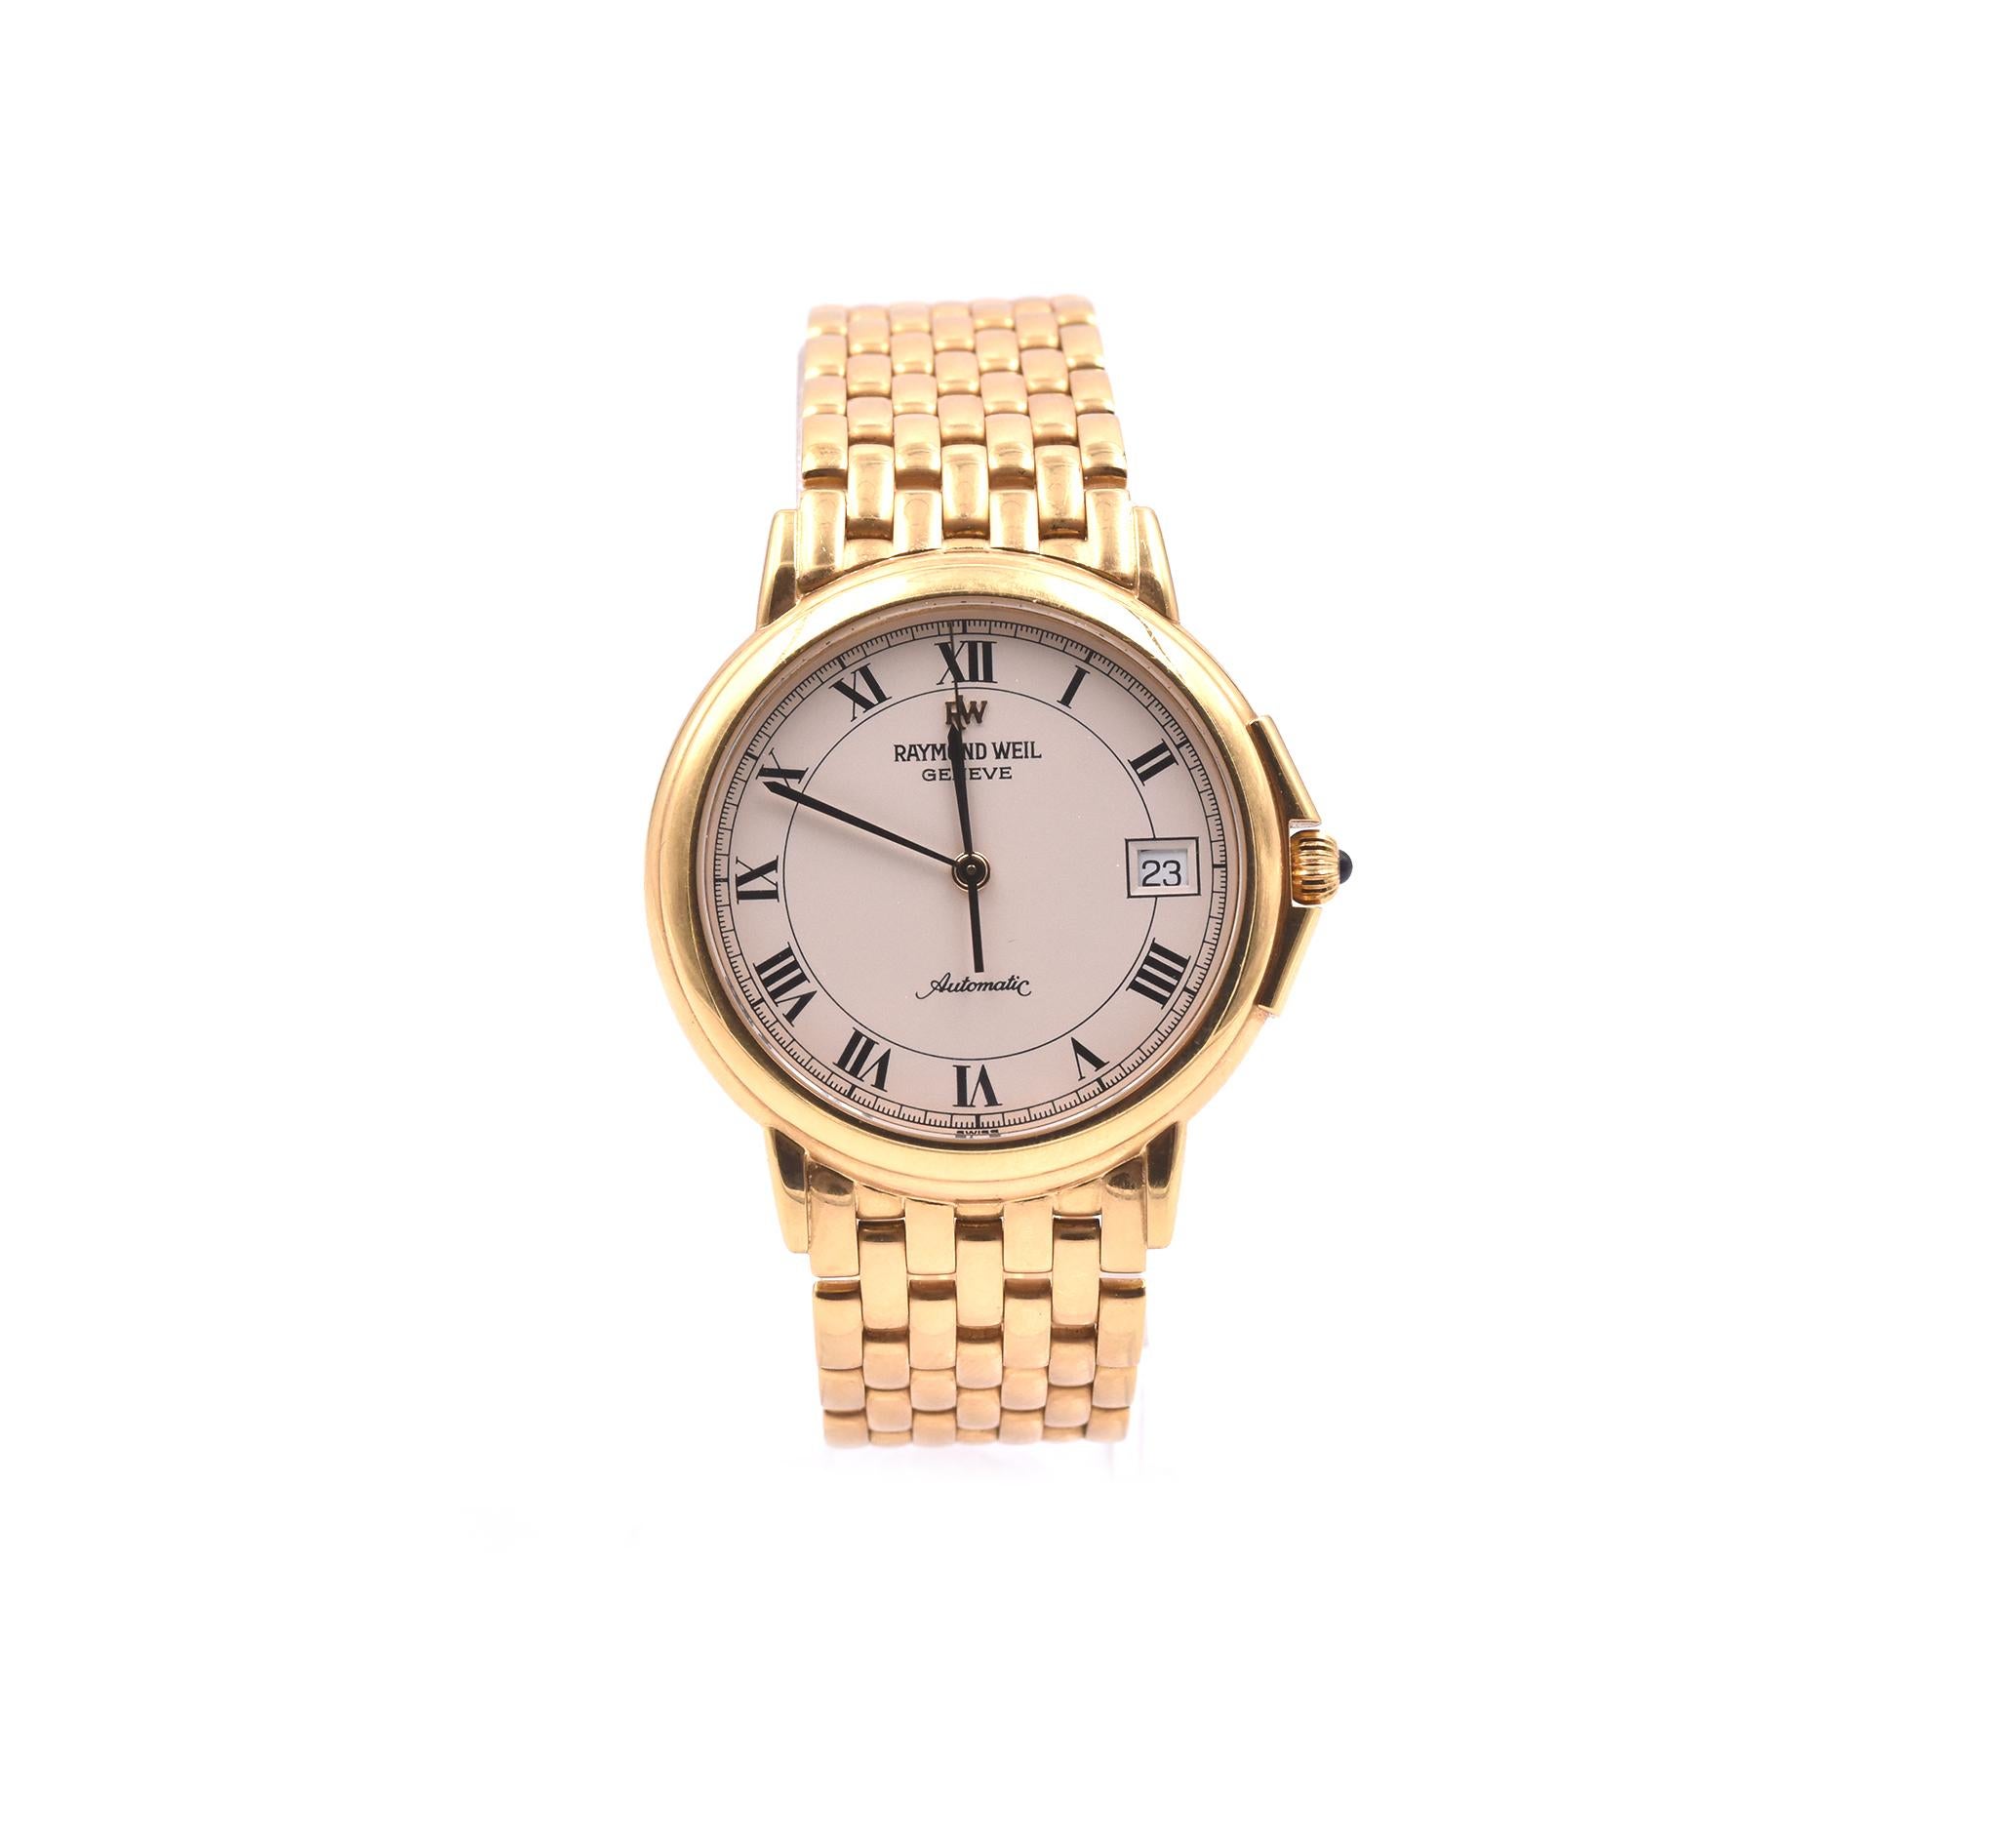 Movement: automatic
Function: hours, minutes, date
Case: 35mm, yellow gold case, sapphire protective crystal, pull/push crown, water resistant
Band: 18k yellow gold bracelet 
Dial: ivory dial, black Roman numerals, black hands, gold second